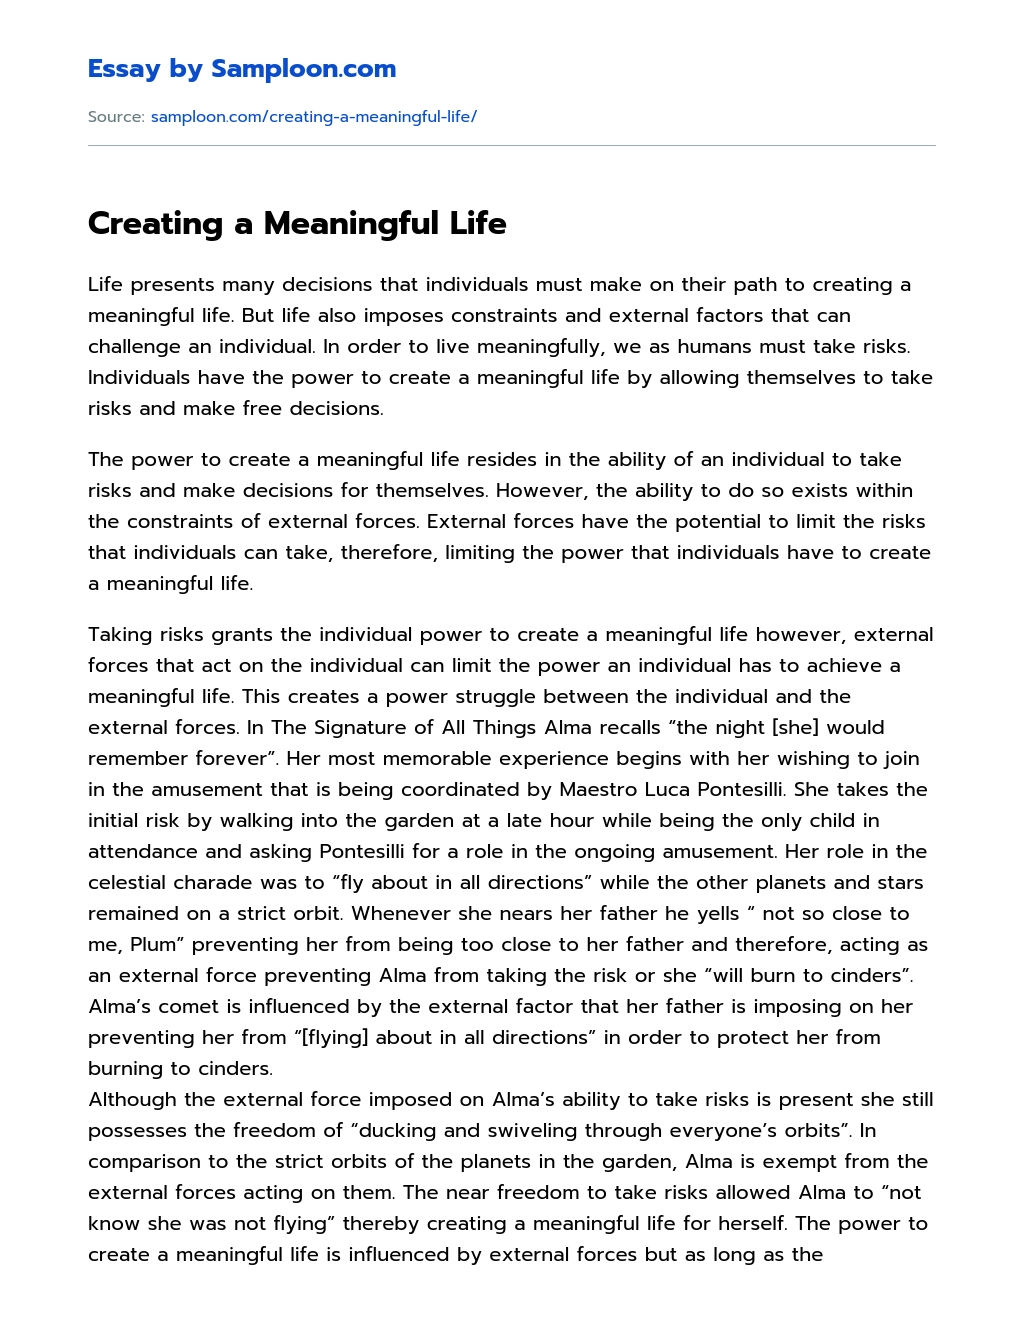 Creating a Meaningful Life essay